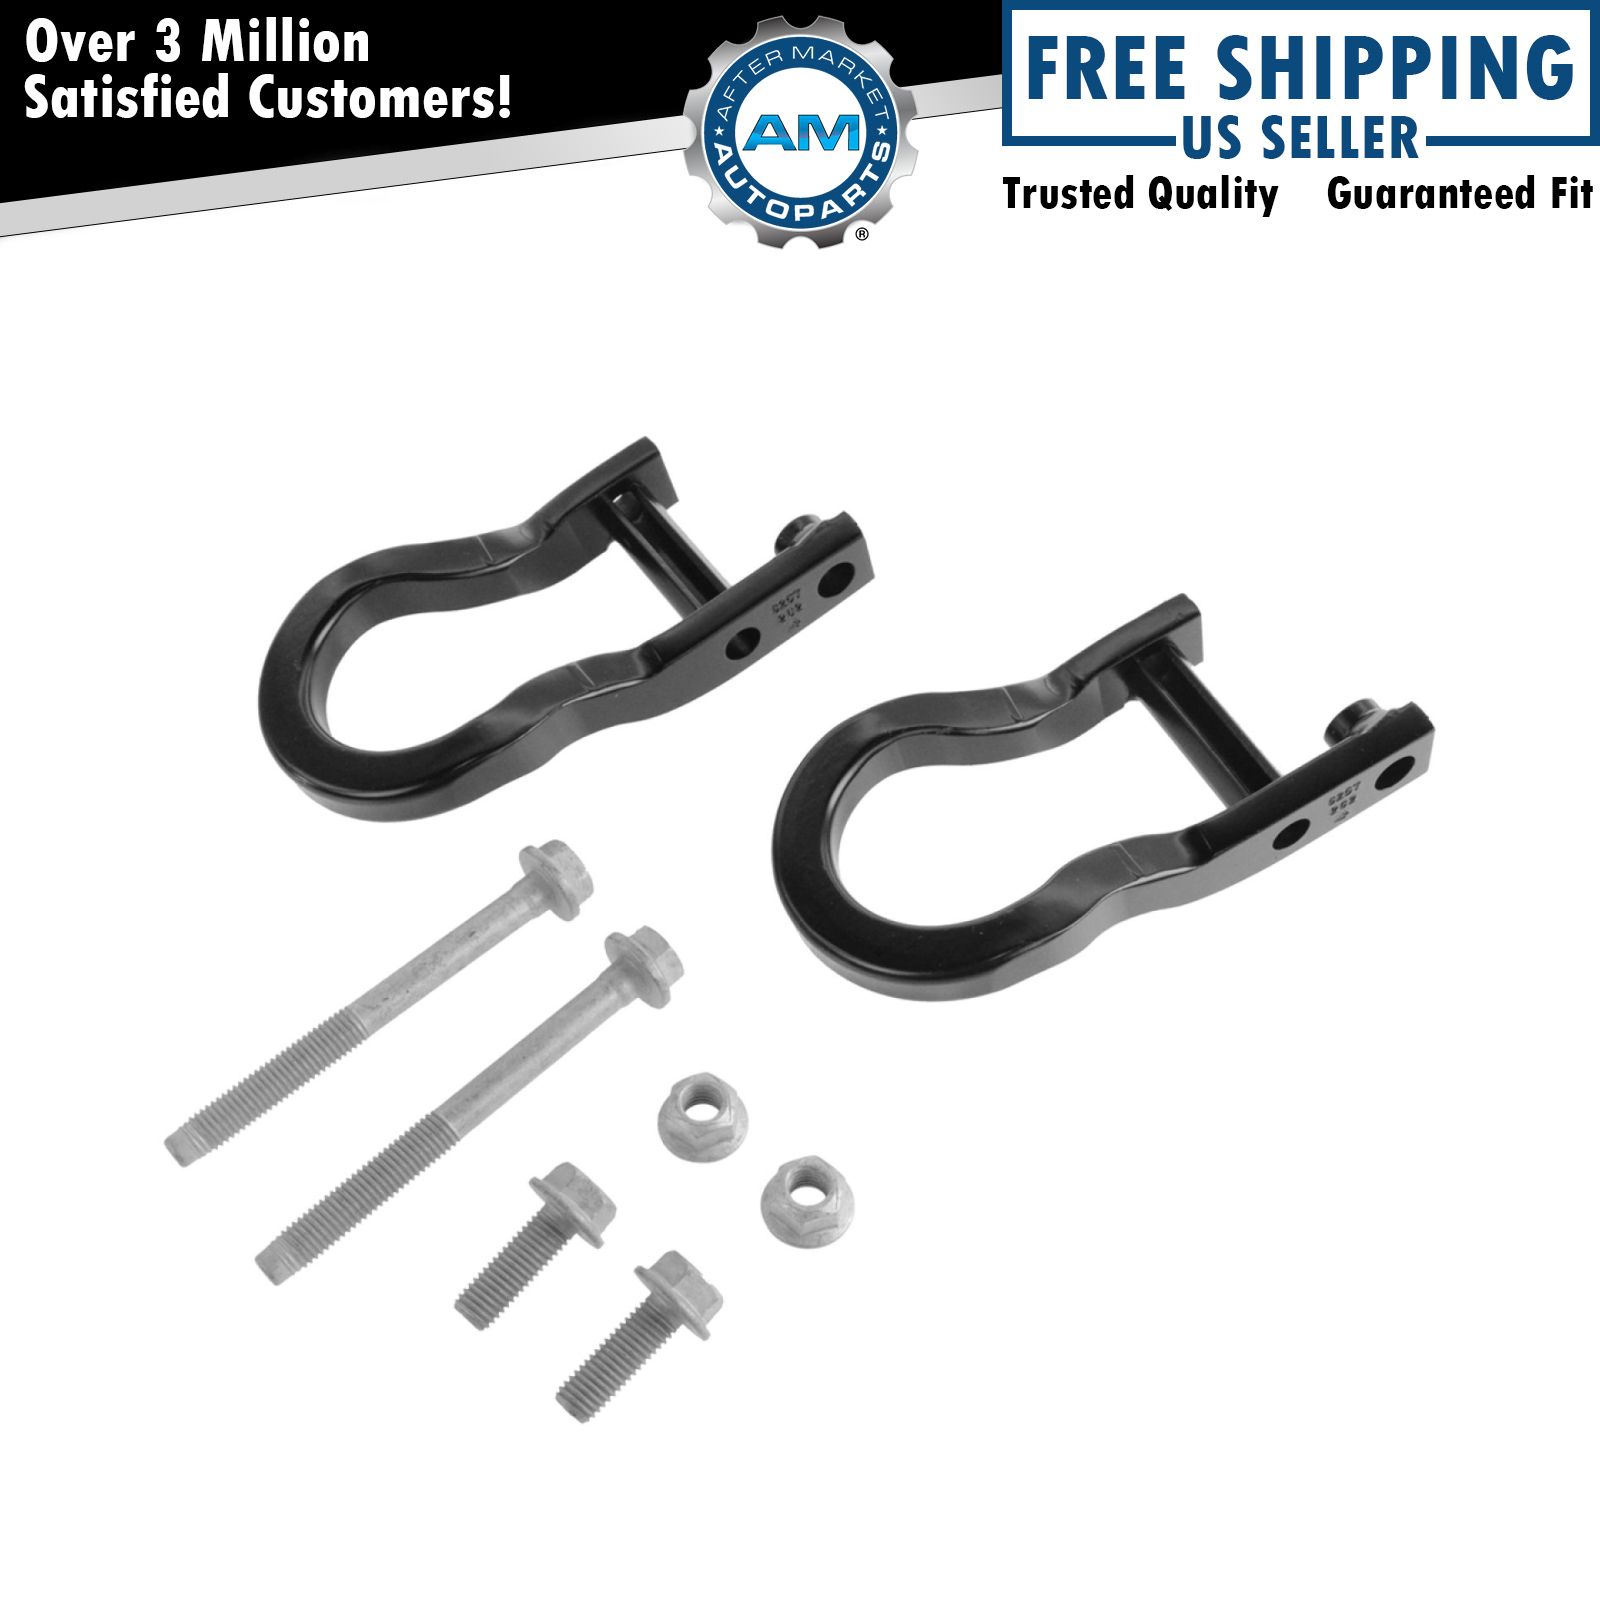 OEM Front Bumper Black Tow Hook Package Kit Pair for Chevy GMC Pickup Truck